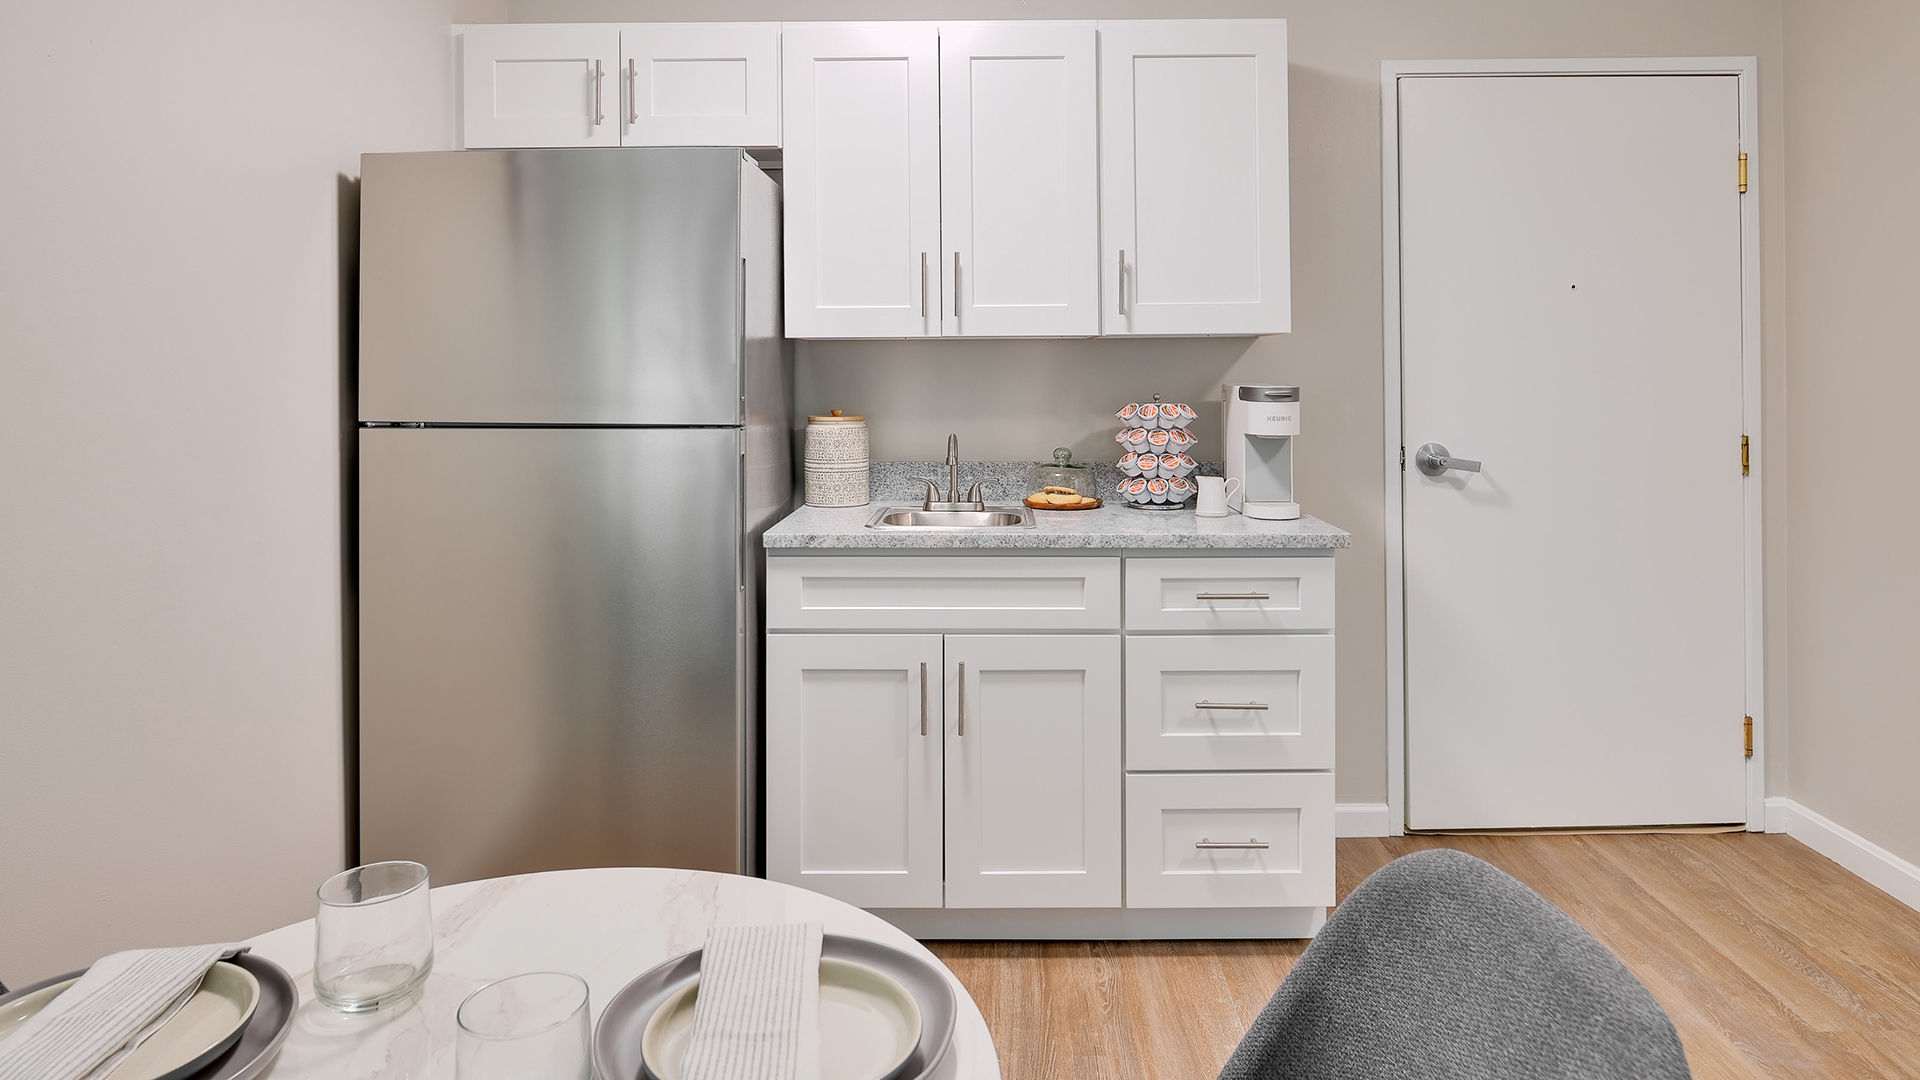 Holiday Summer Place apartment kitchenette